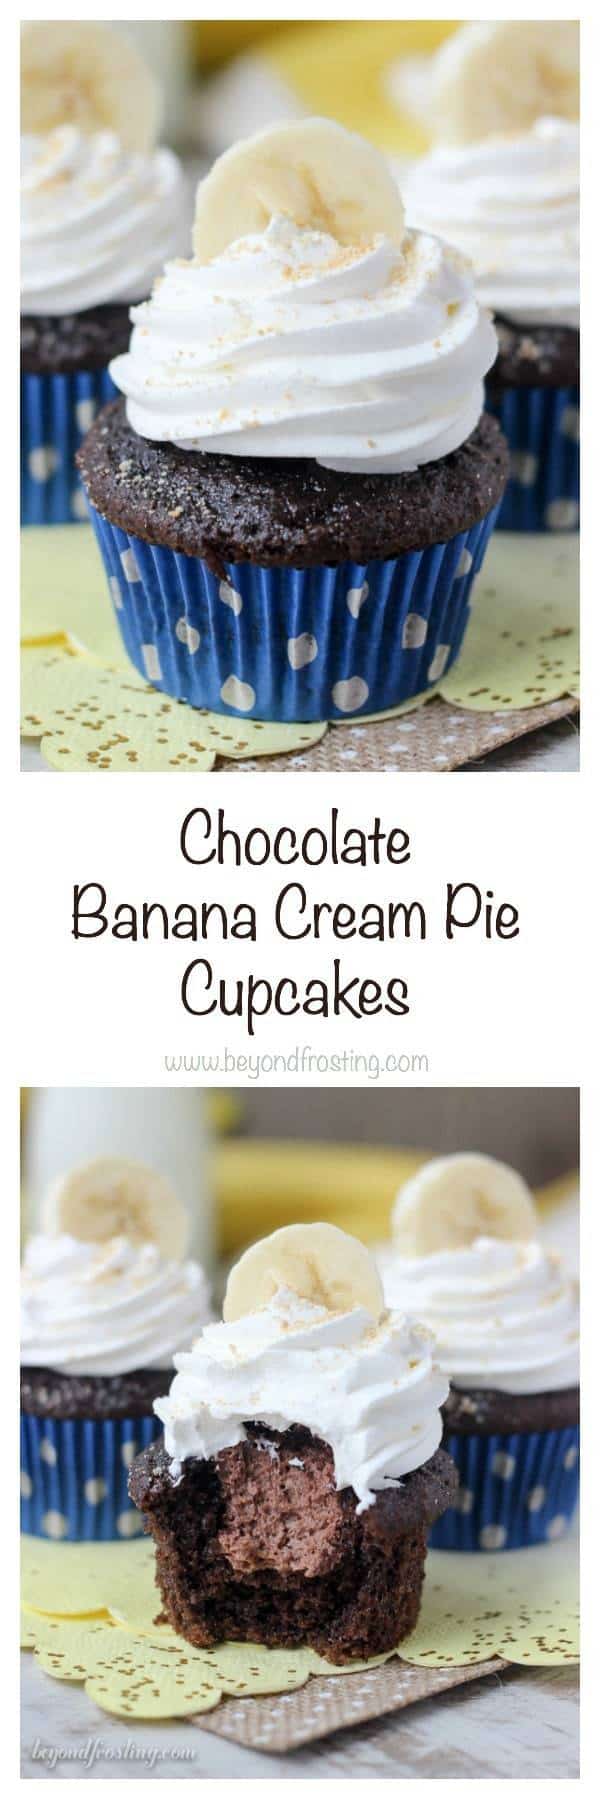  These chocolate banana cream pie cupcakes are made with a chocolate banana cupcake and filled with a chocolate mousse. Top them off with some whipped cream, bananas and Nilla Wafers.